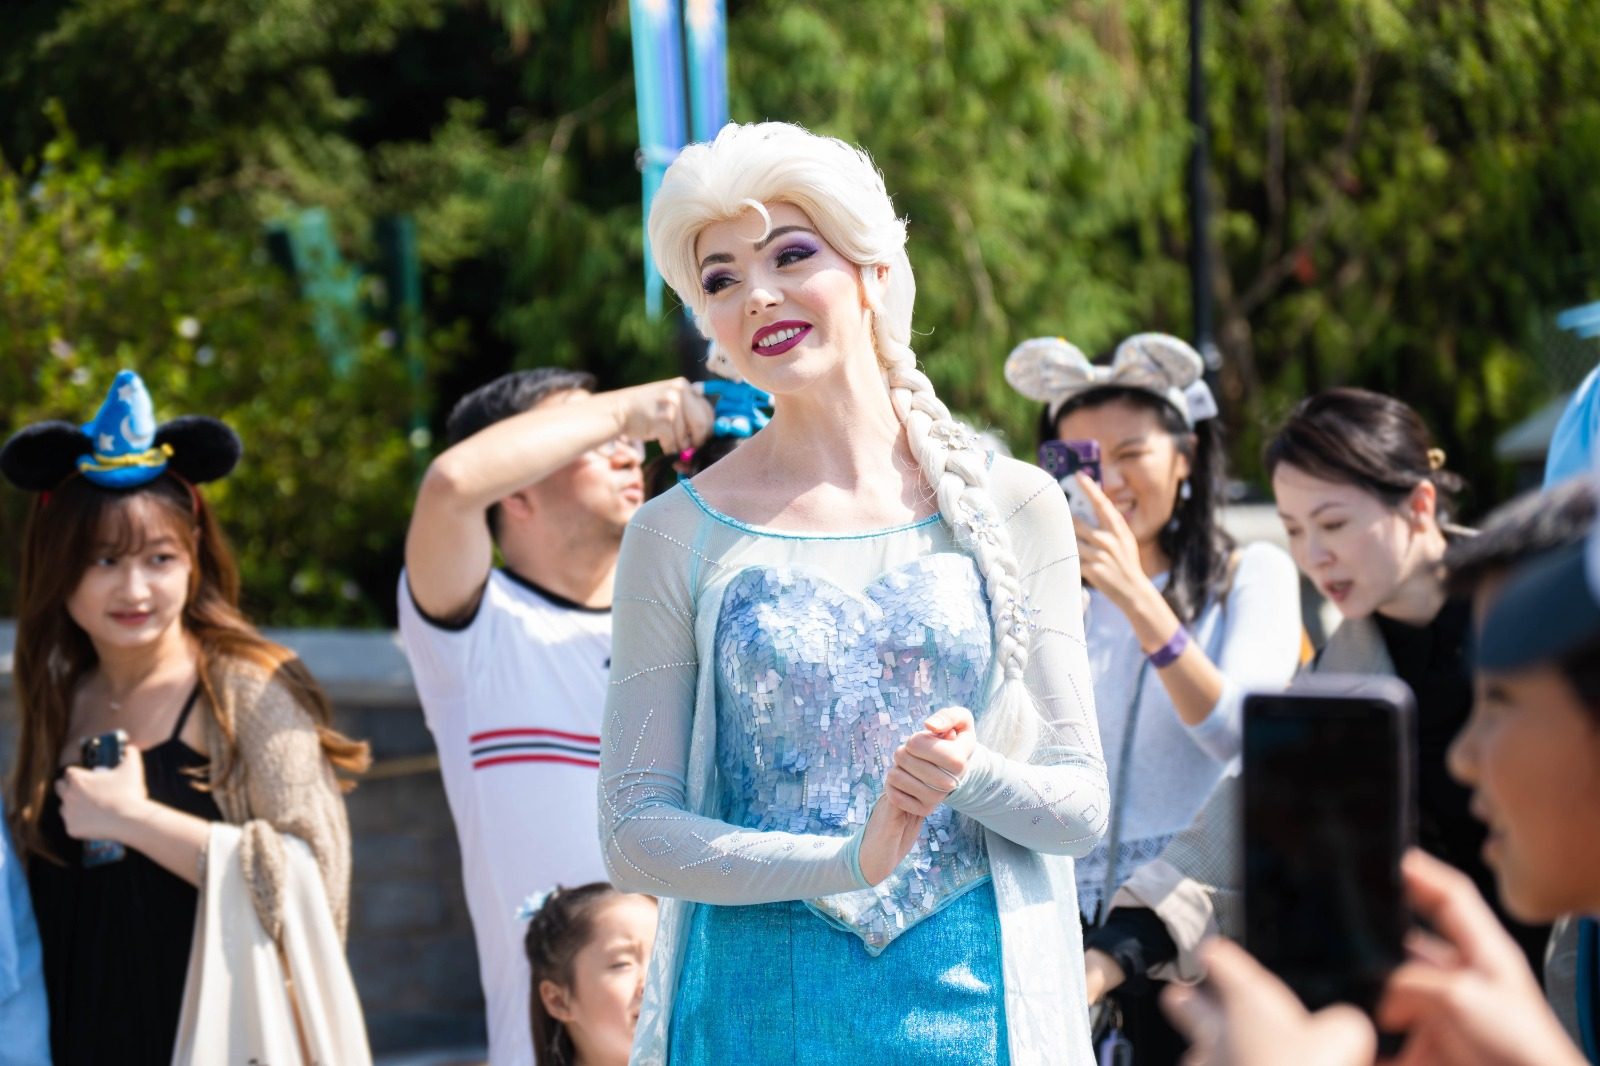 Elsa from Disney’s animated hit Frozen at World of Frozen, the new attraction at Hong Kong Disneyland. Photo: Lilith Kwong